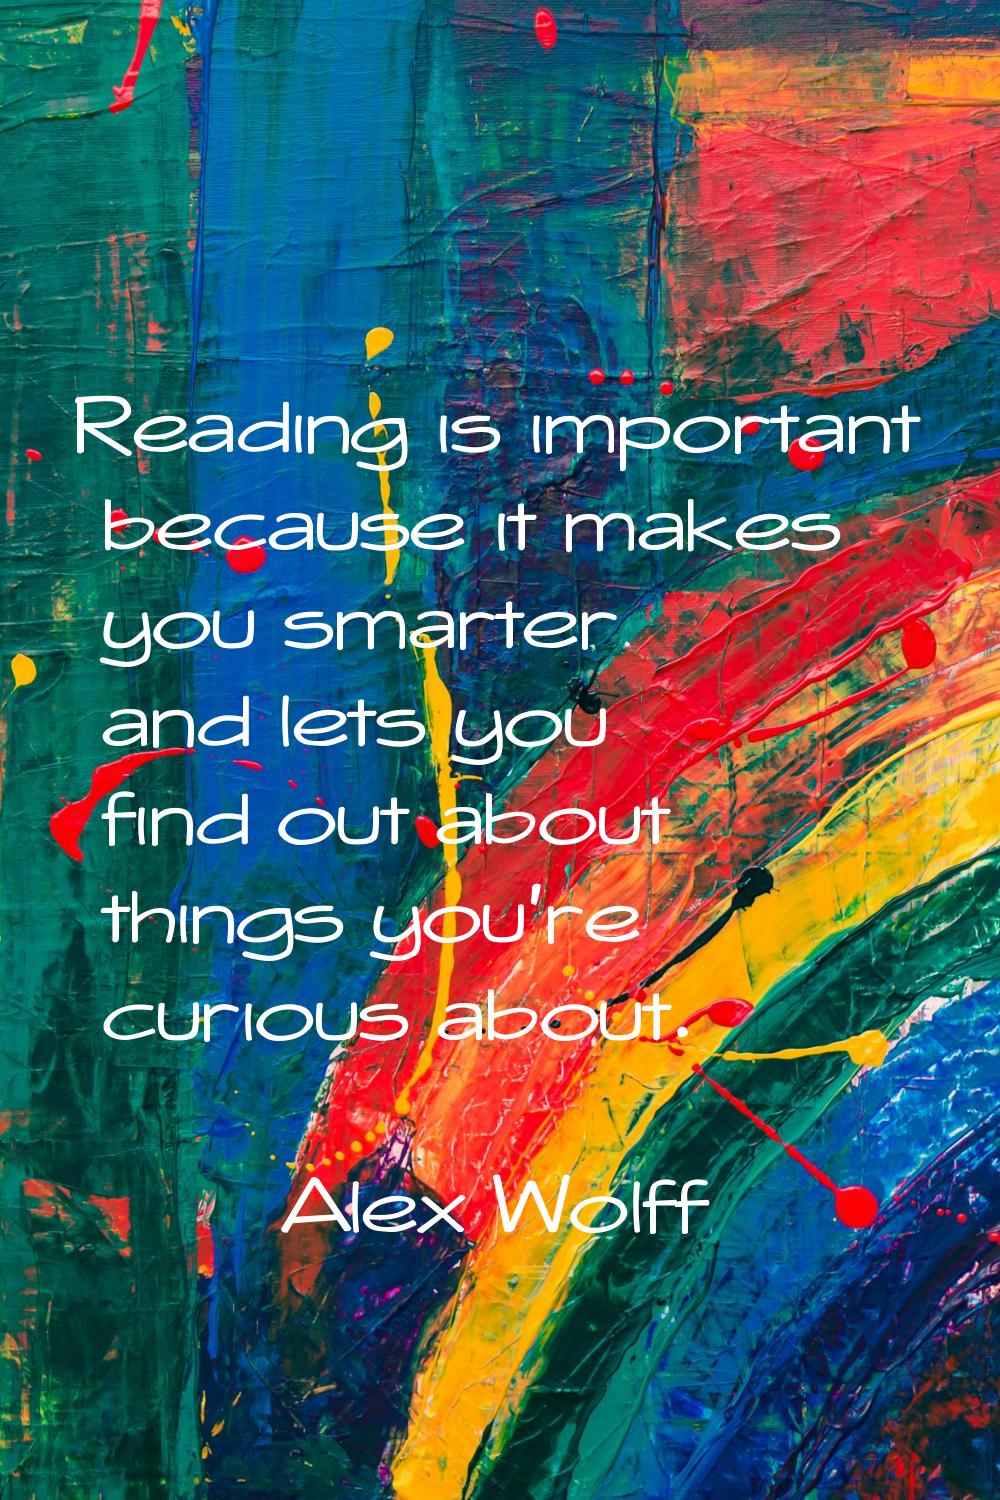 Reading is important because it makes you smarter and lets you find out about things you're curious